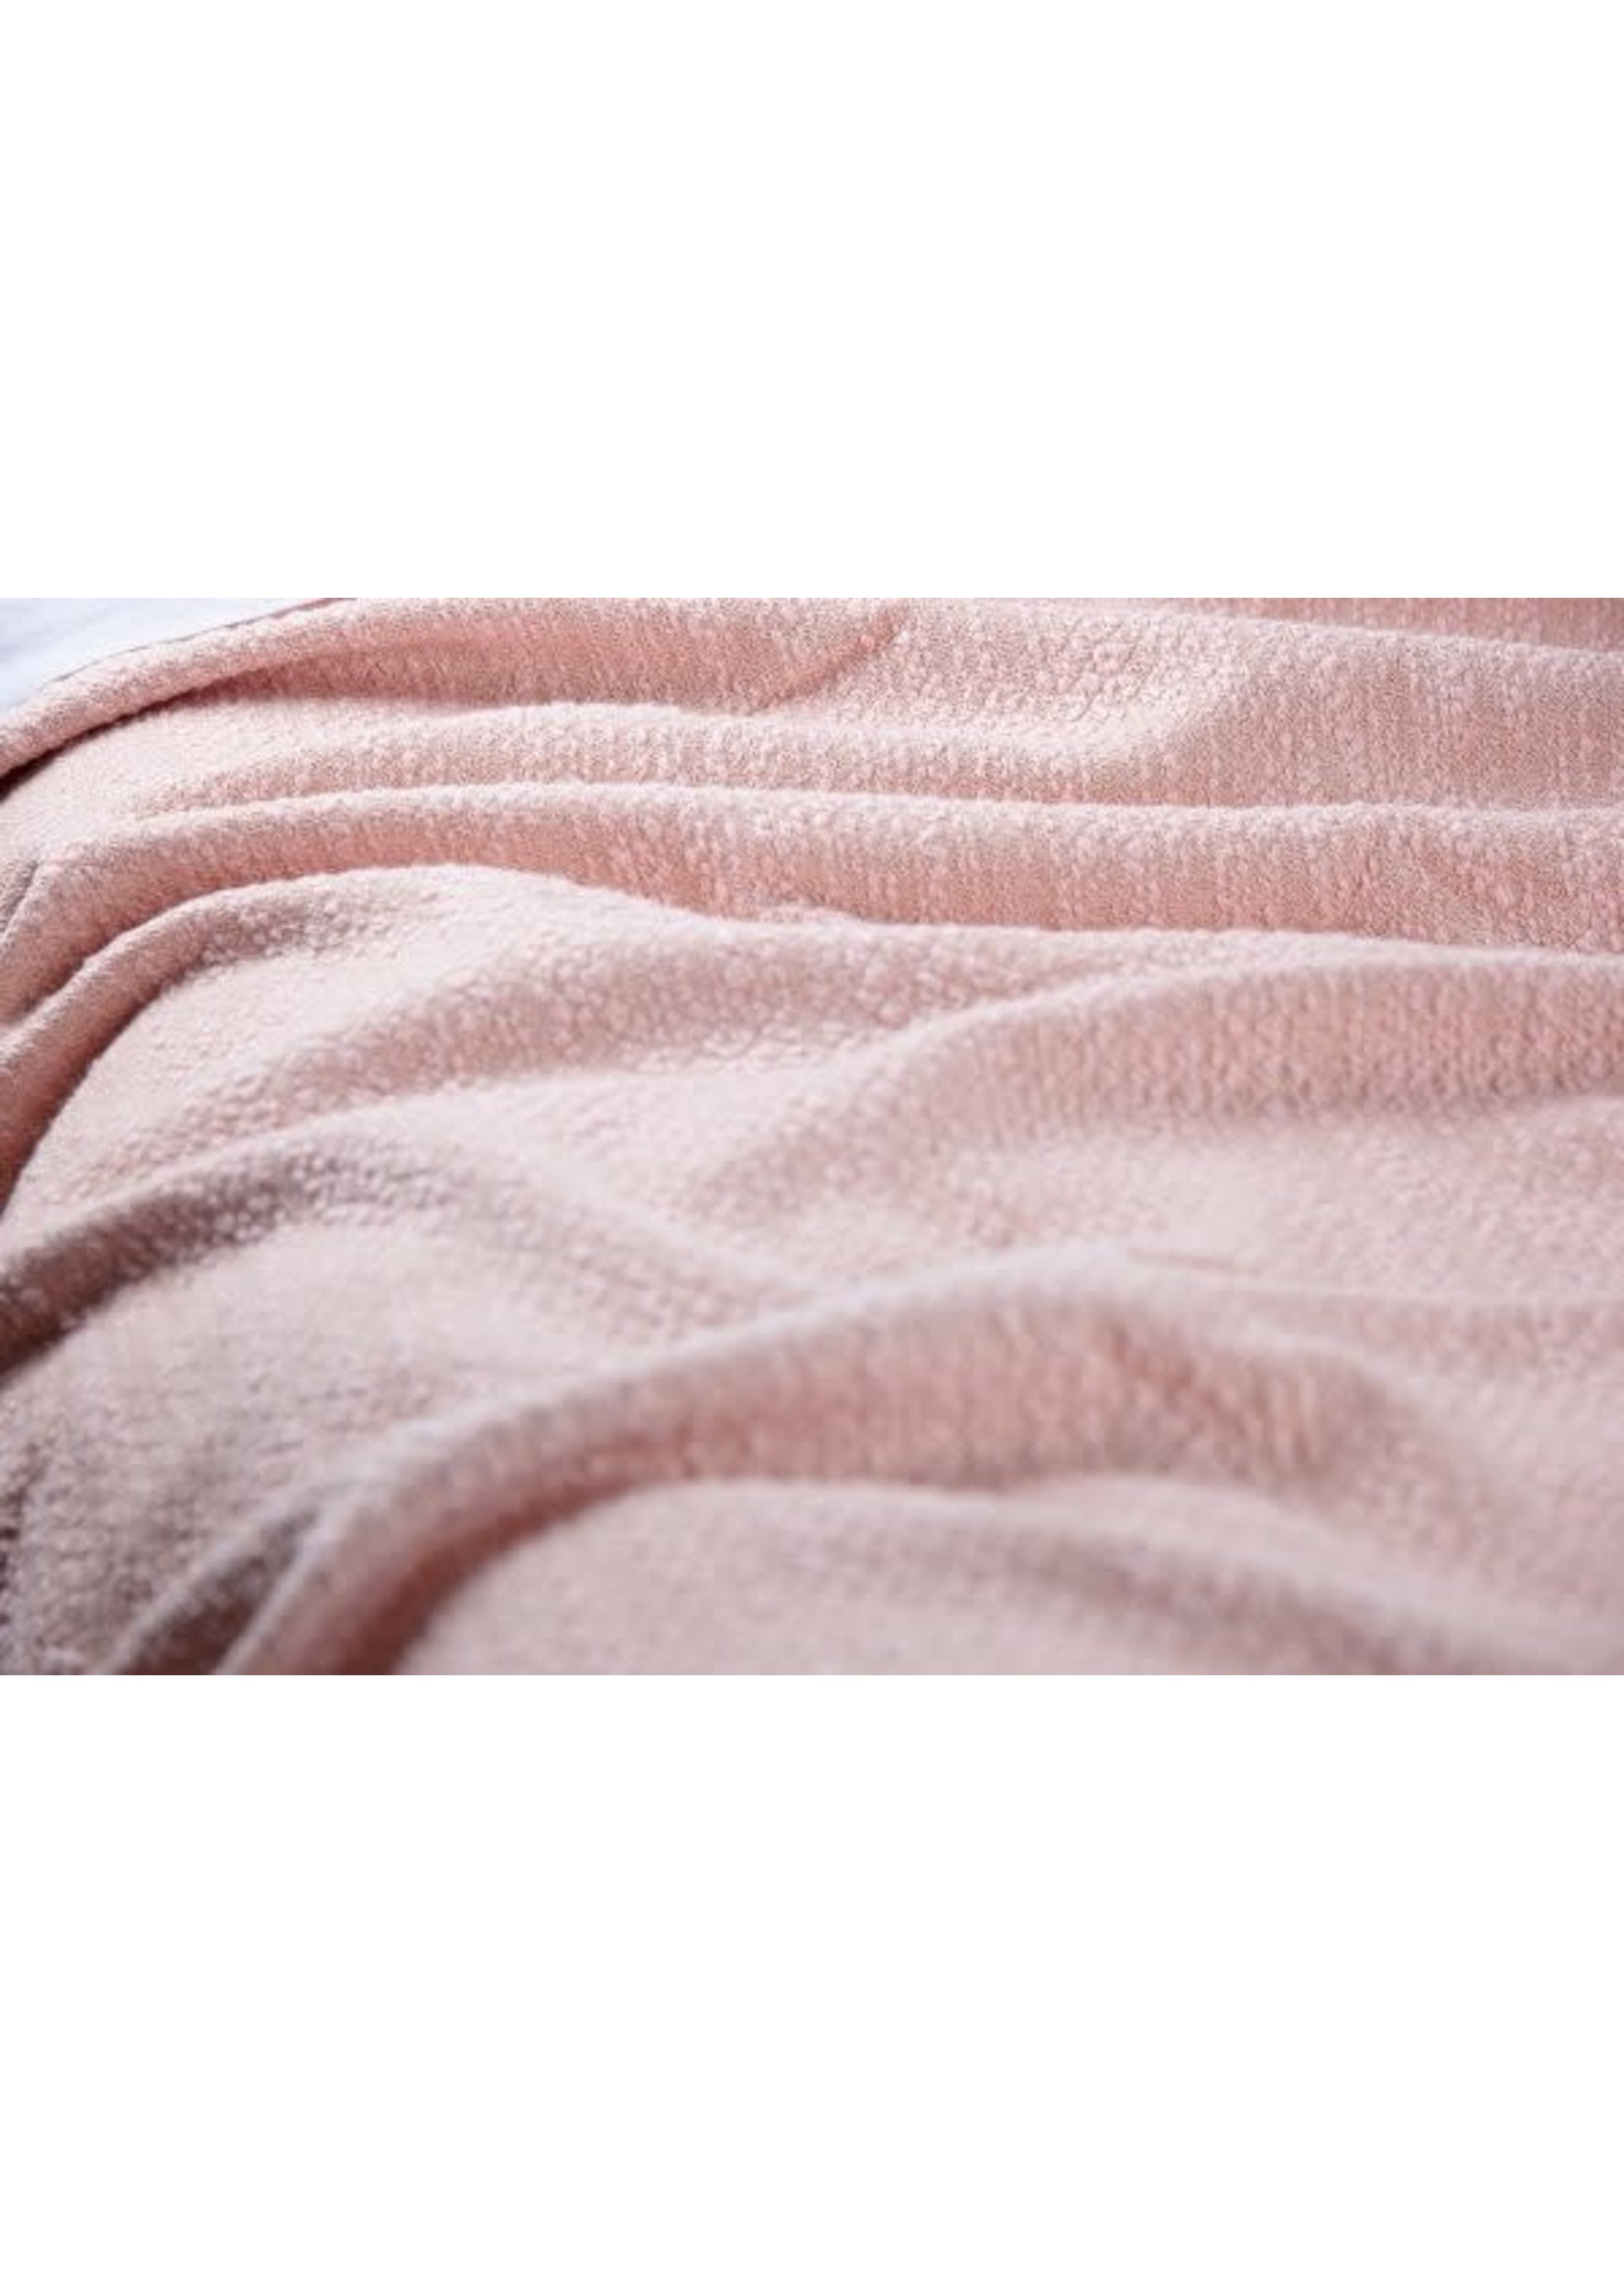 Amity Home Amity Home Orlana Lurex Coverlet, Petal Pink, Queen